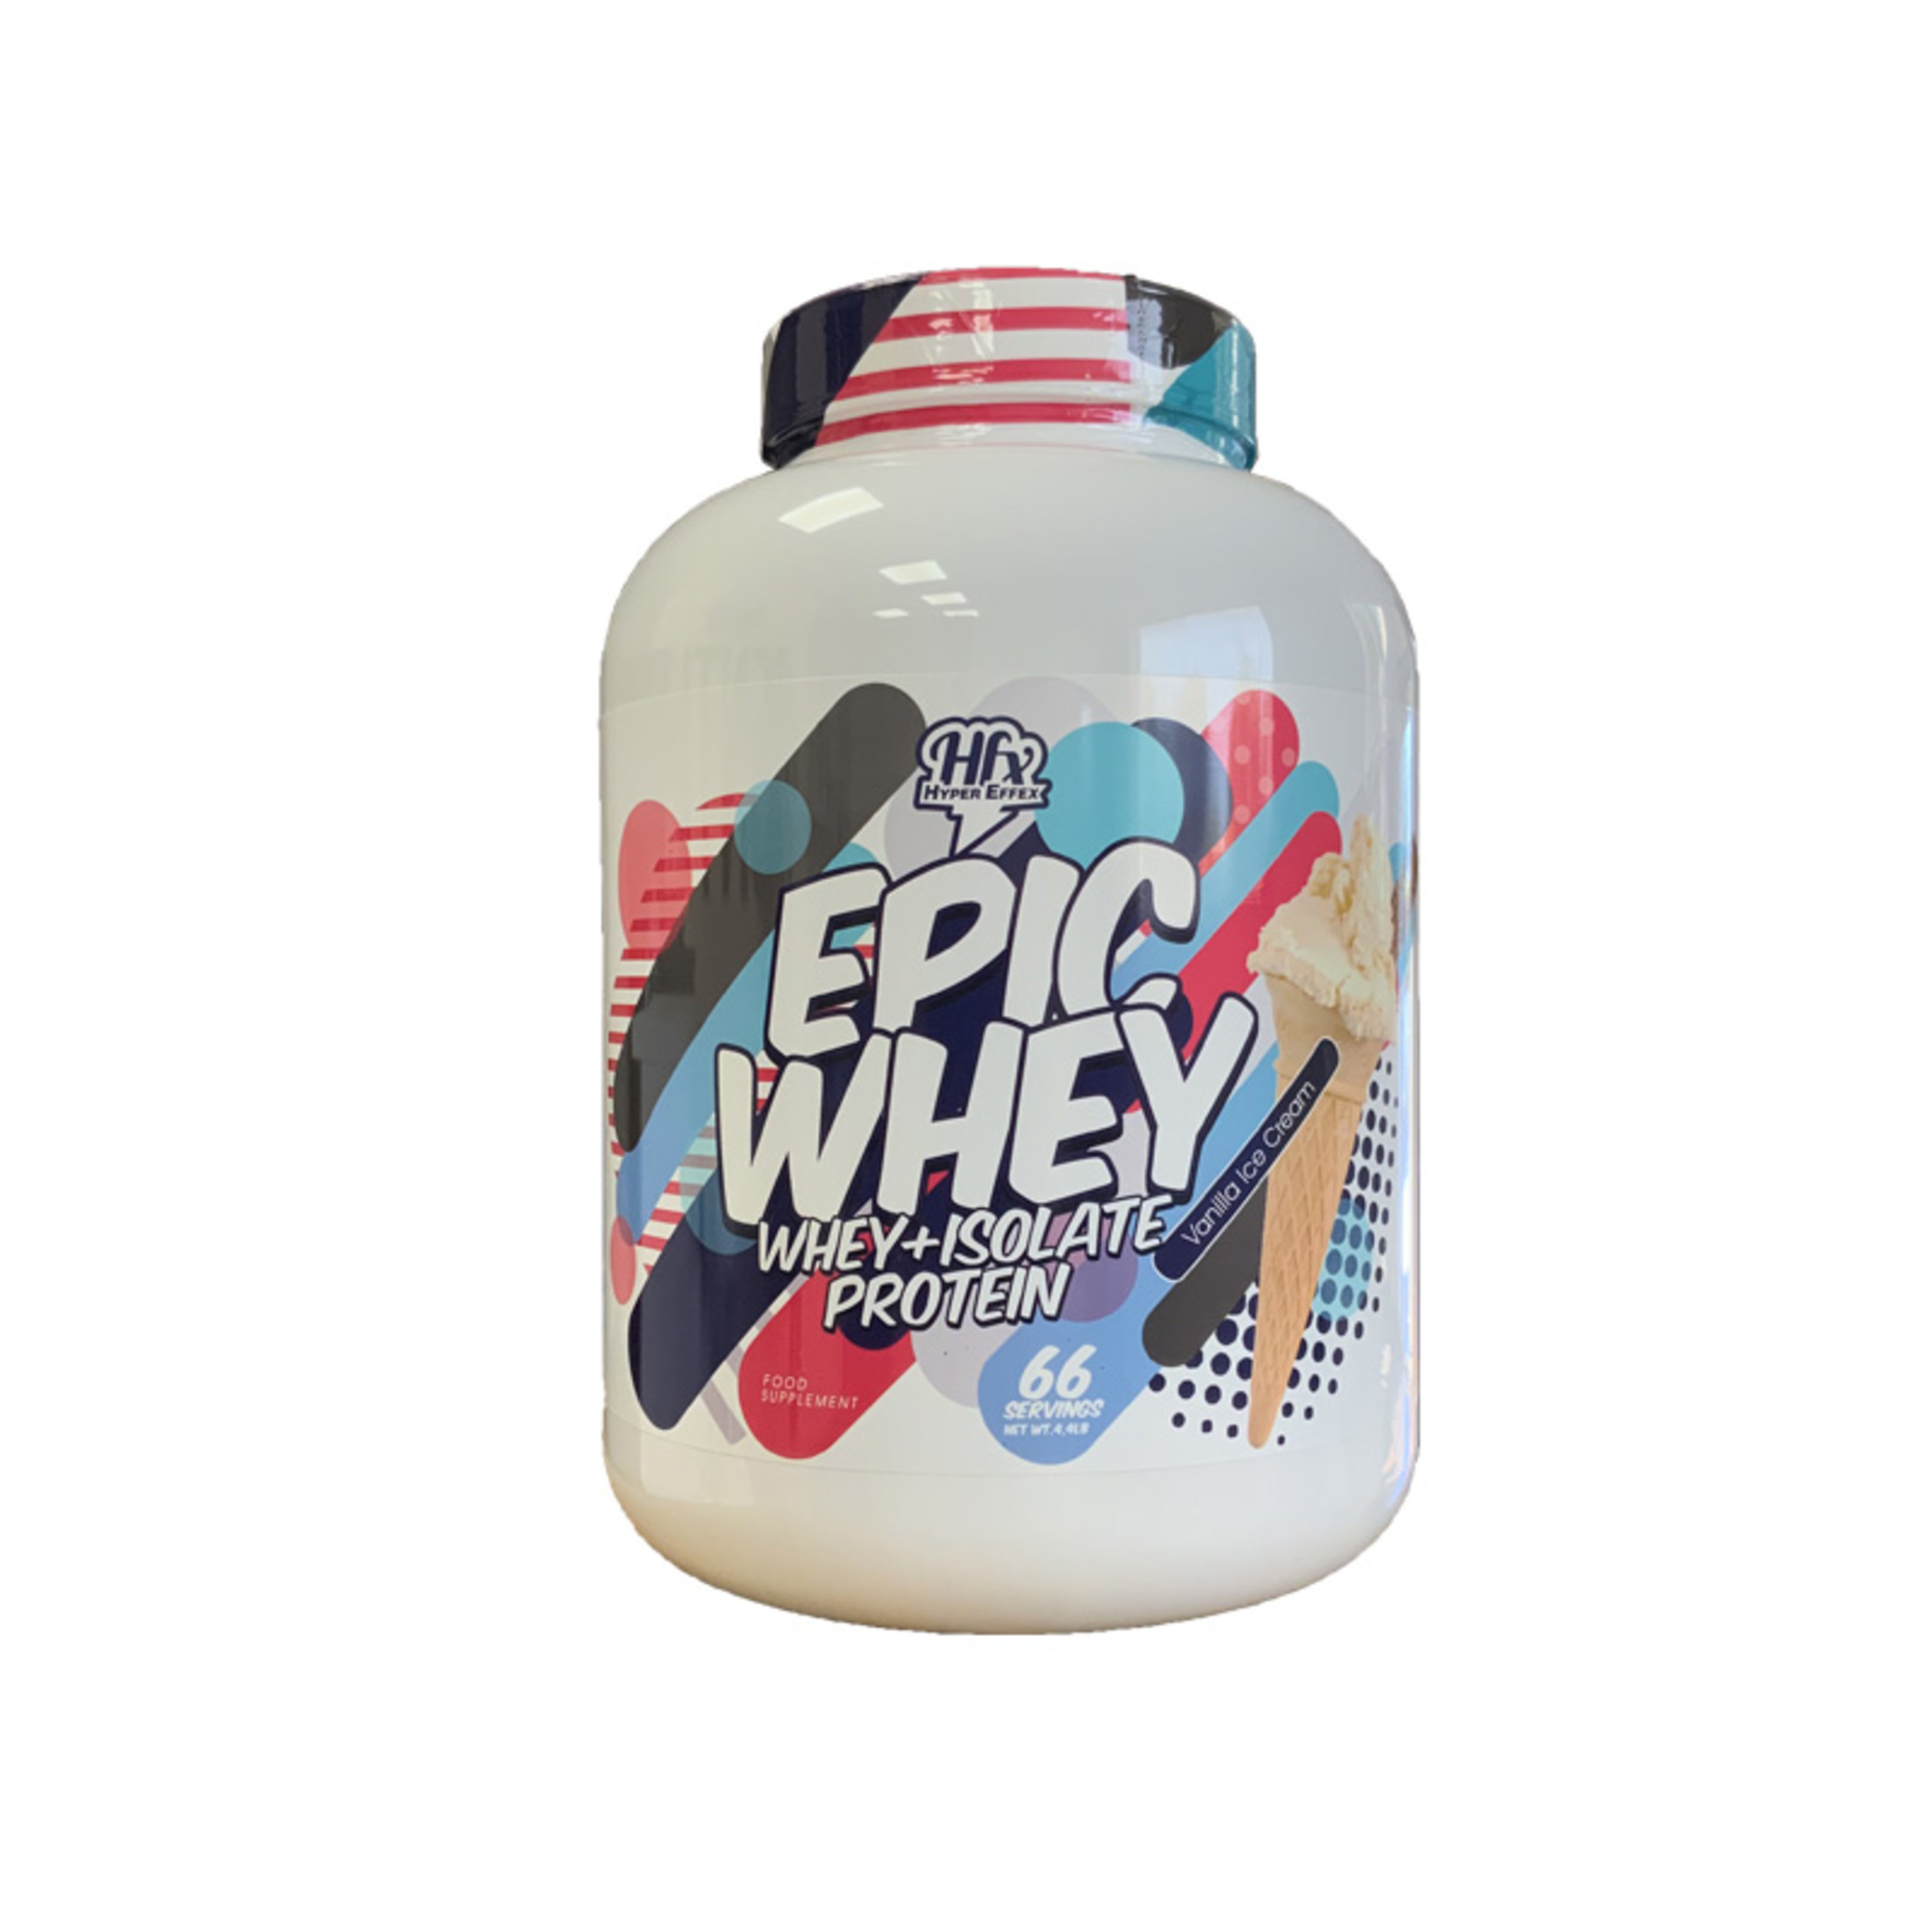 Suplemento Epic Whey 4.4lb - Whey + Isolate Protein De Hypper Effex  MKP